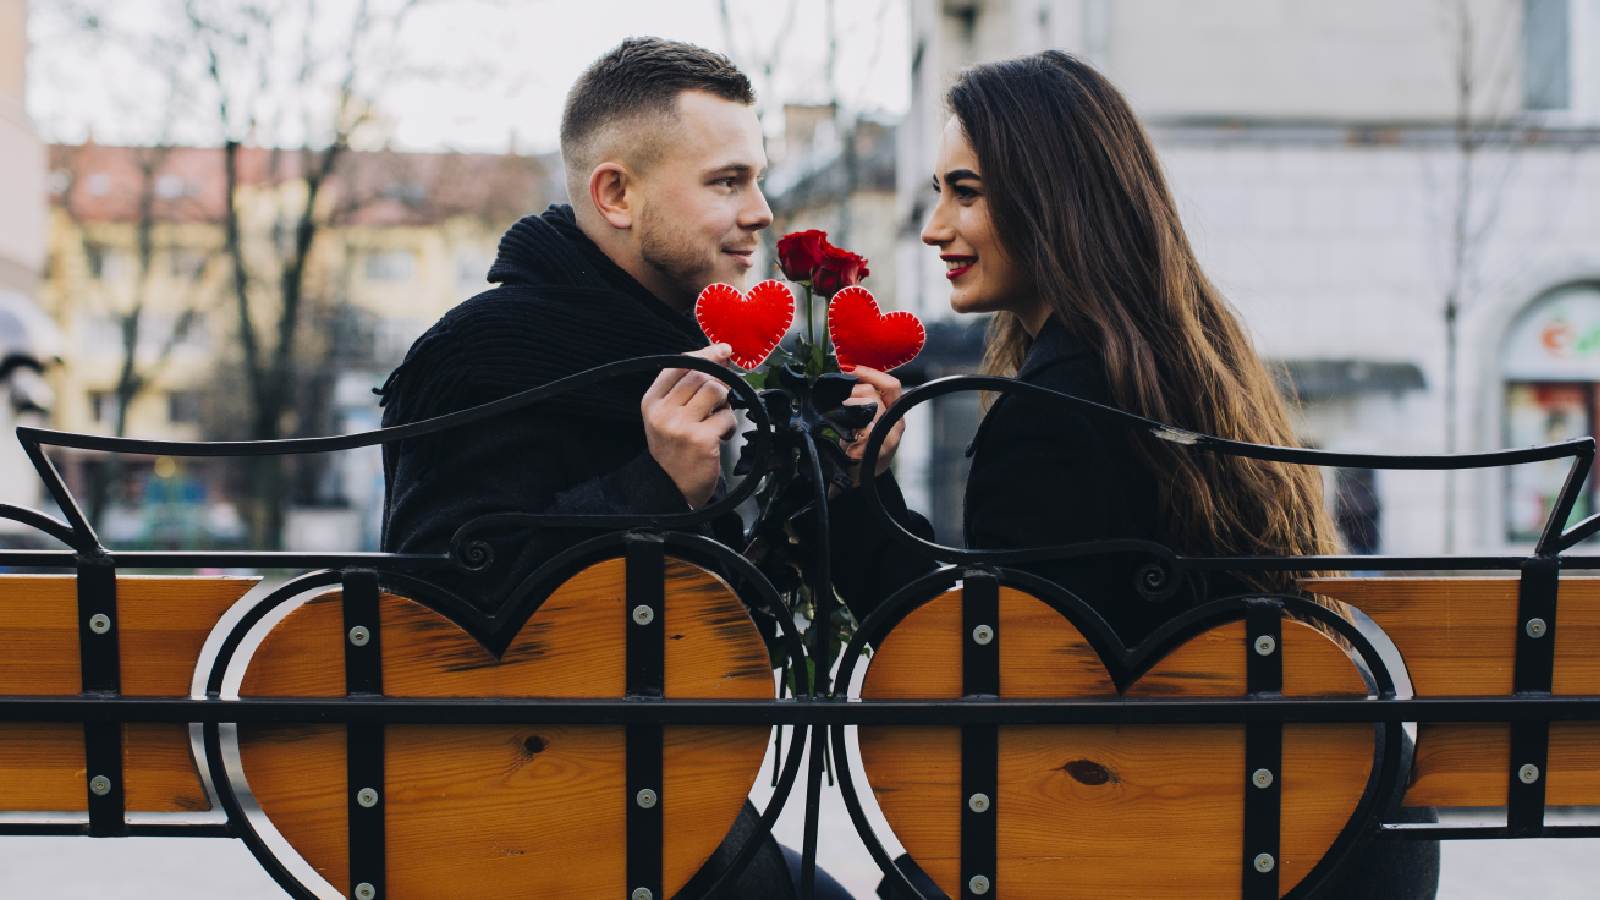 Dry dating: 9 reasons to go alcohol-free this Valentine’s Day